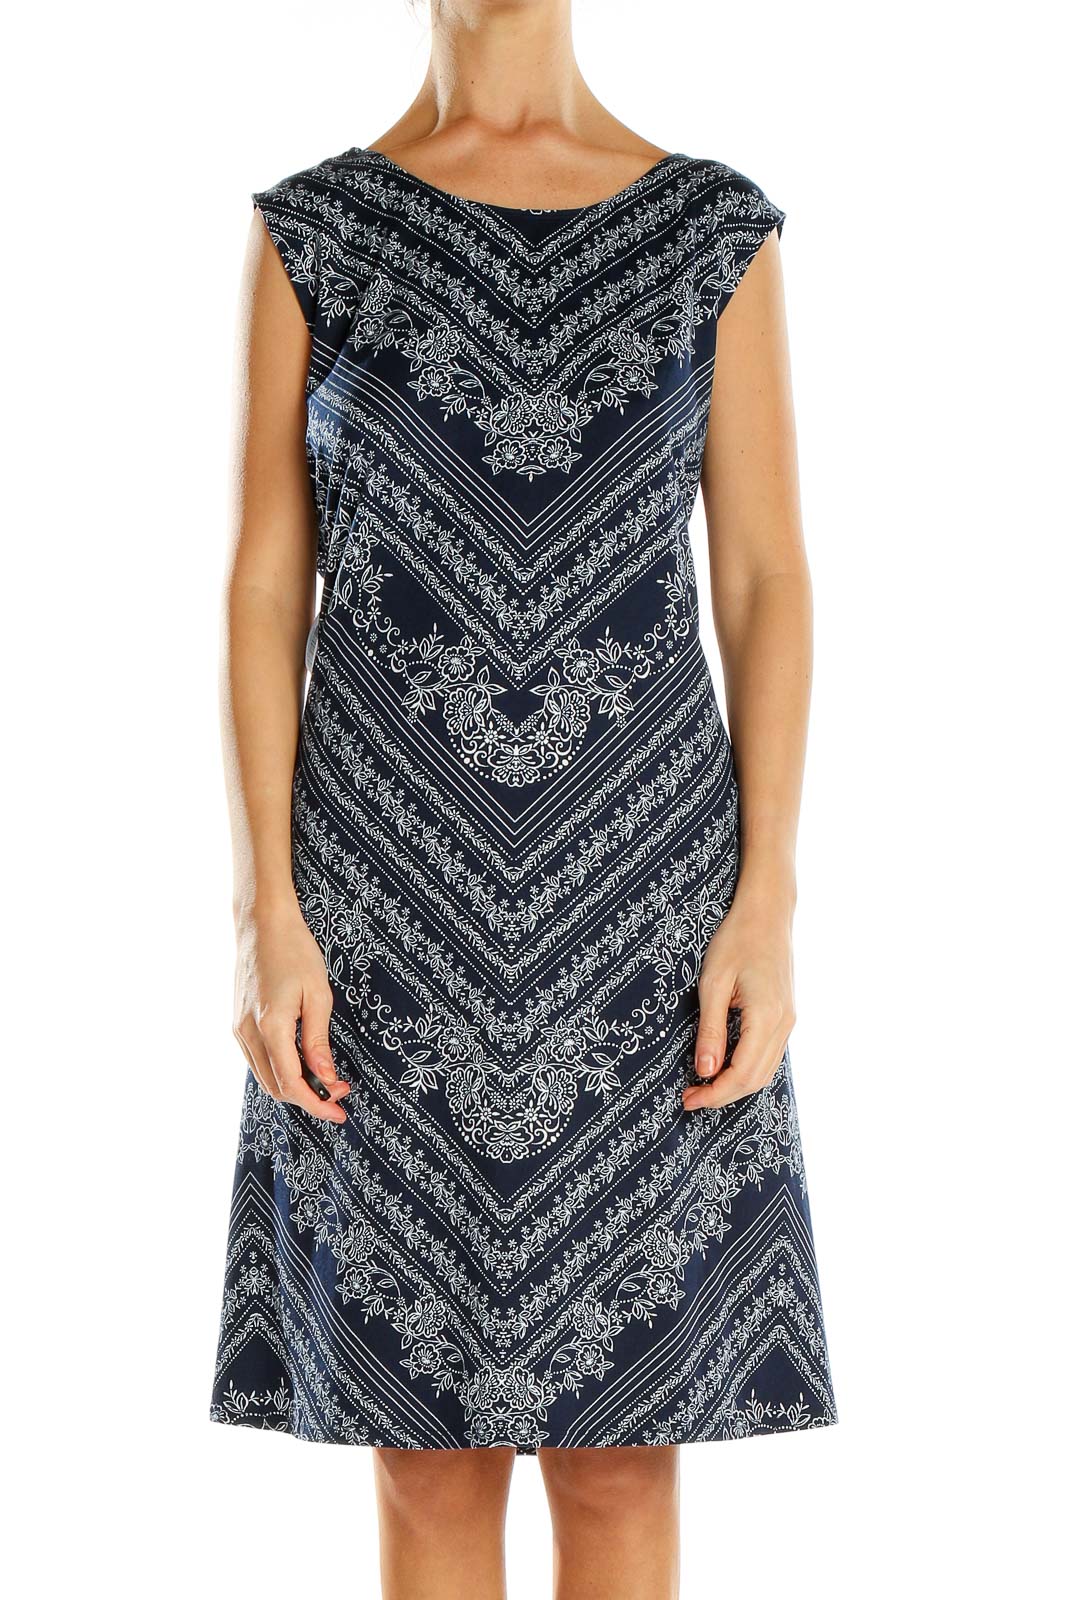 Blue Printed Classic A-Line Dress Front